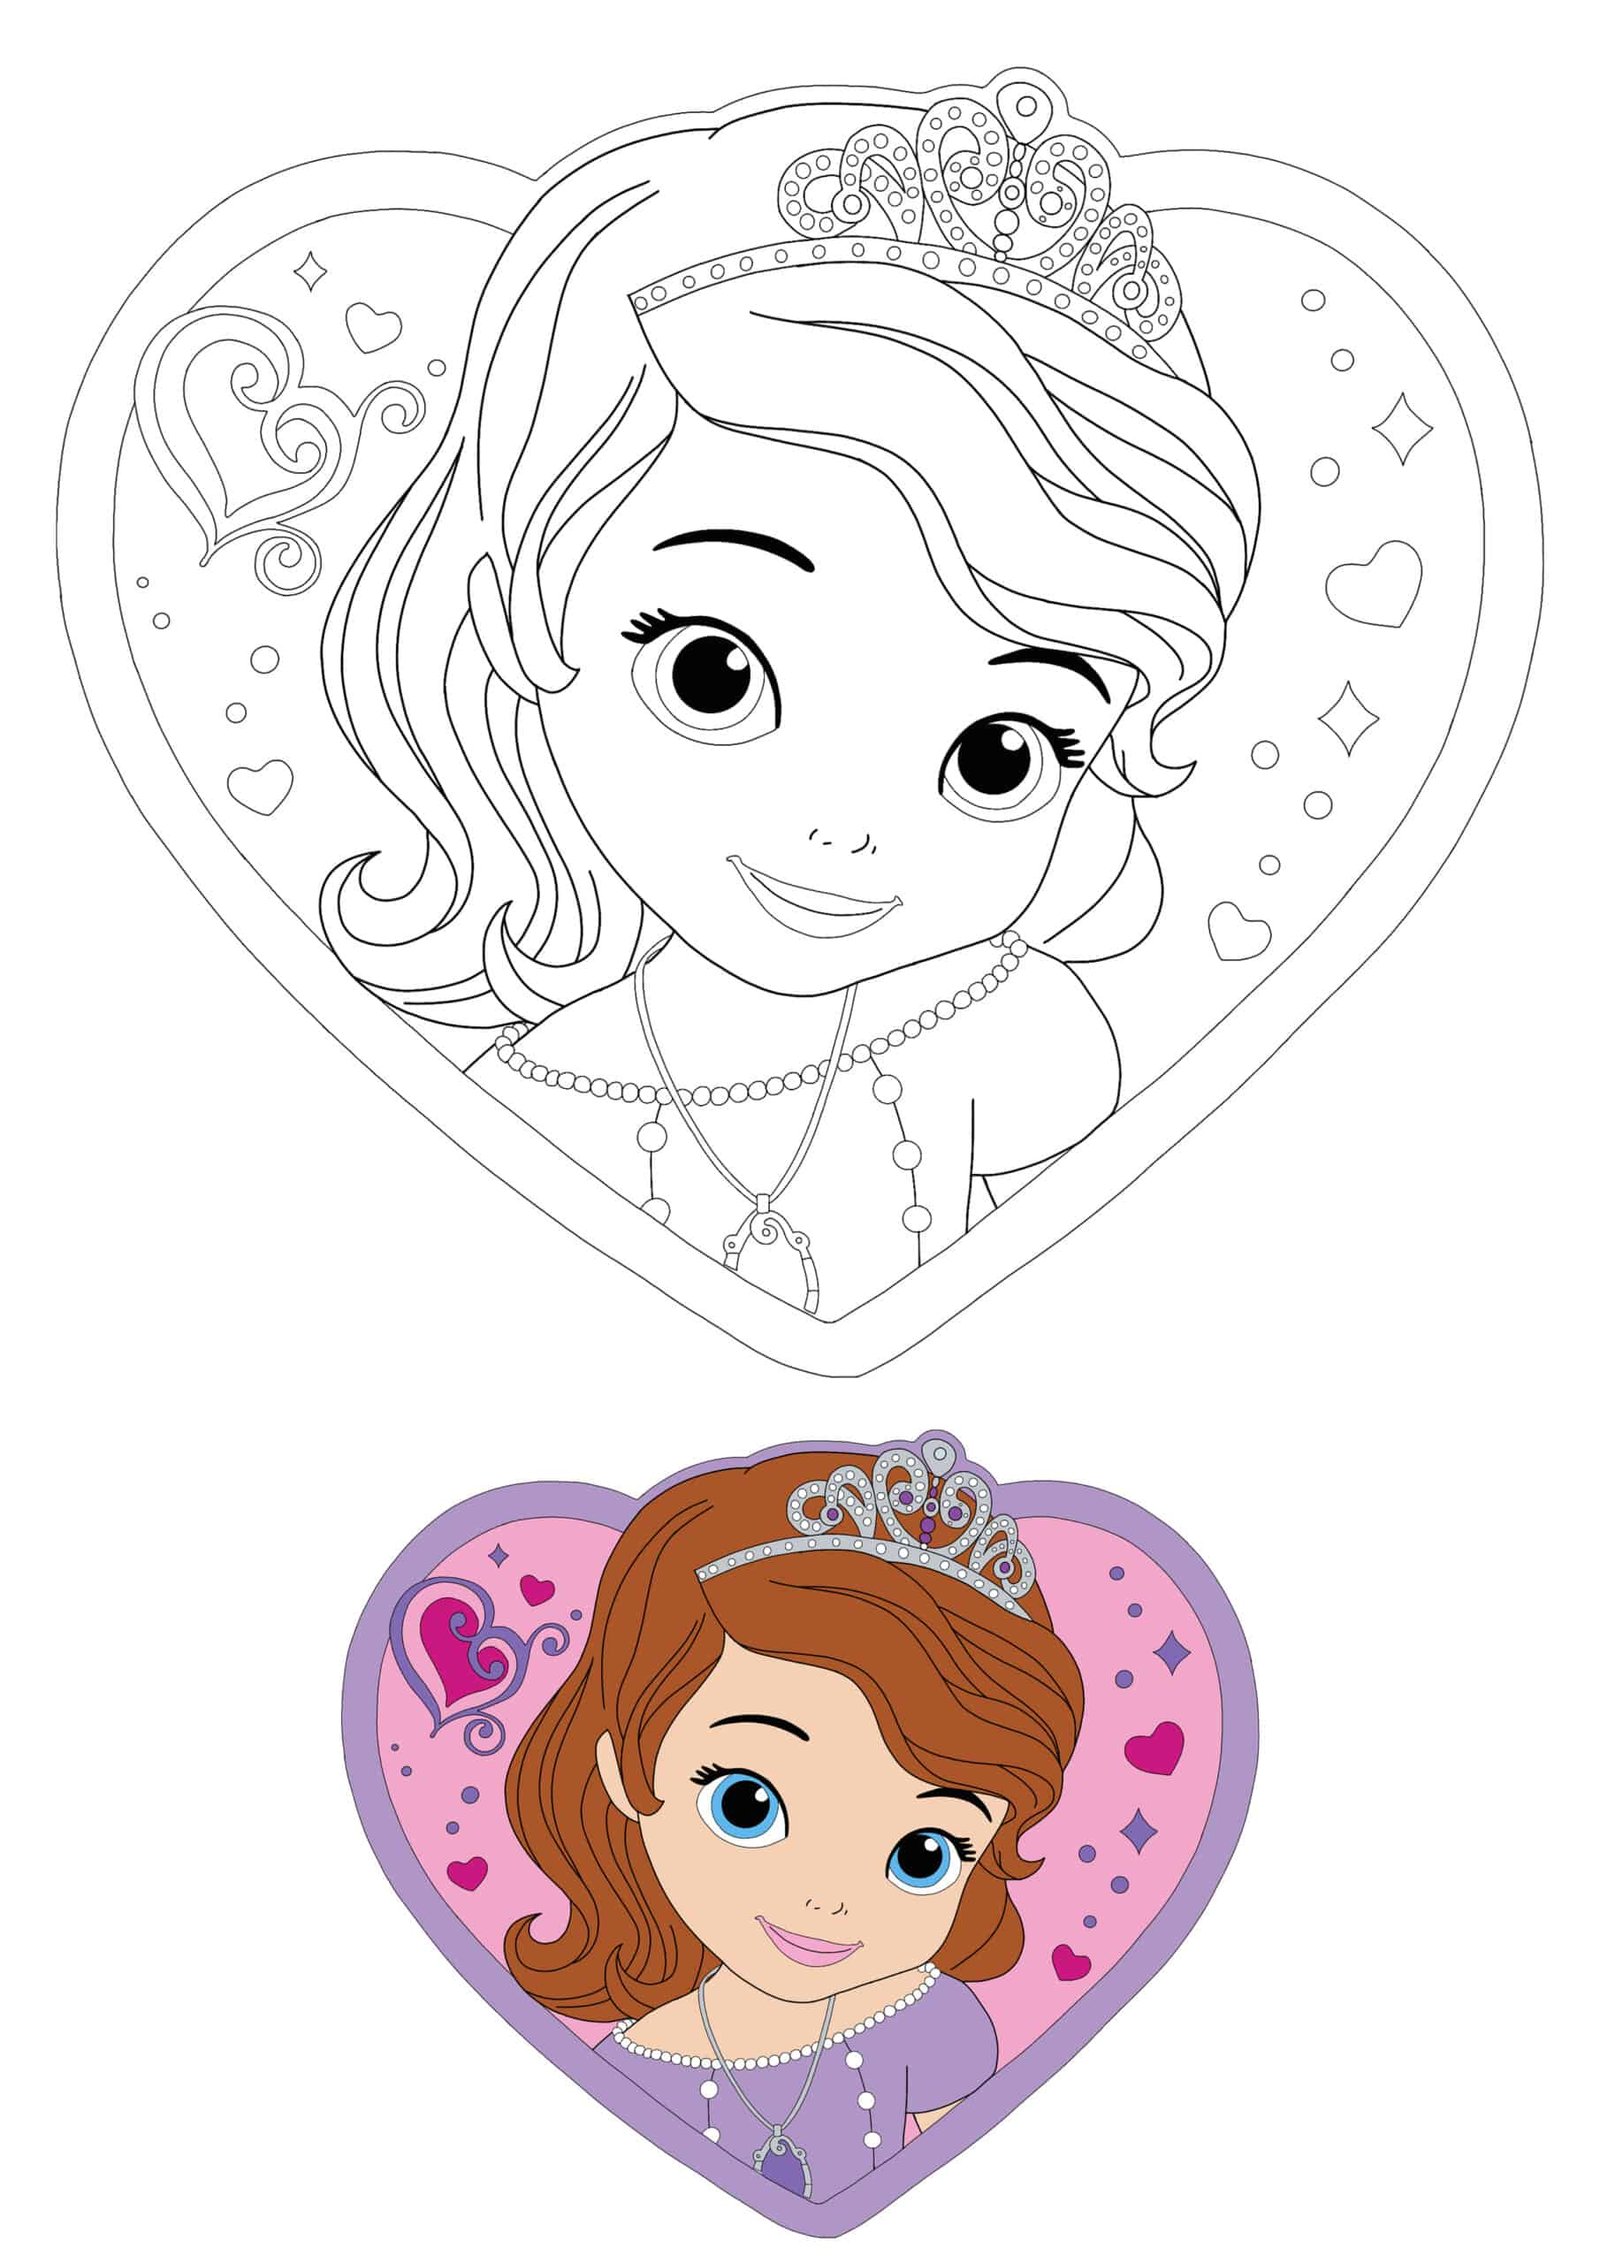 Sofia the First printable coloring page with sample